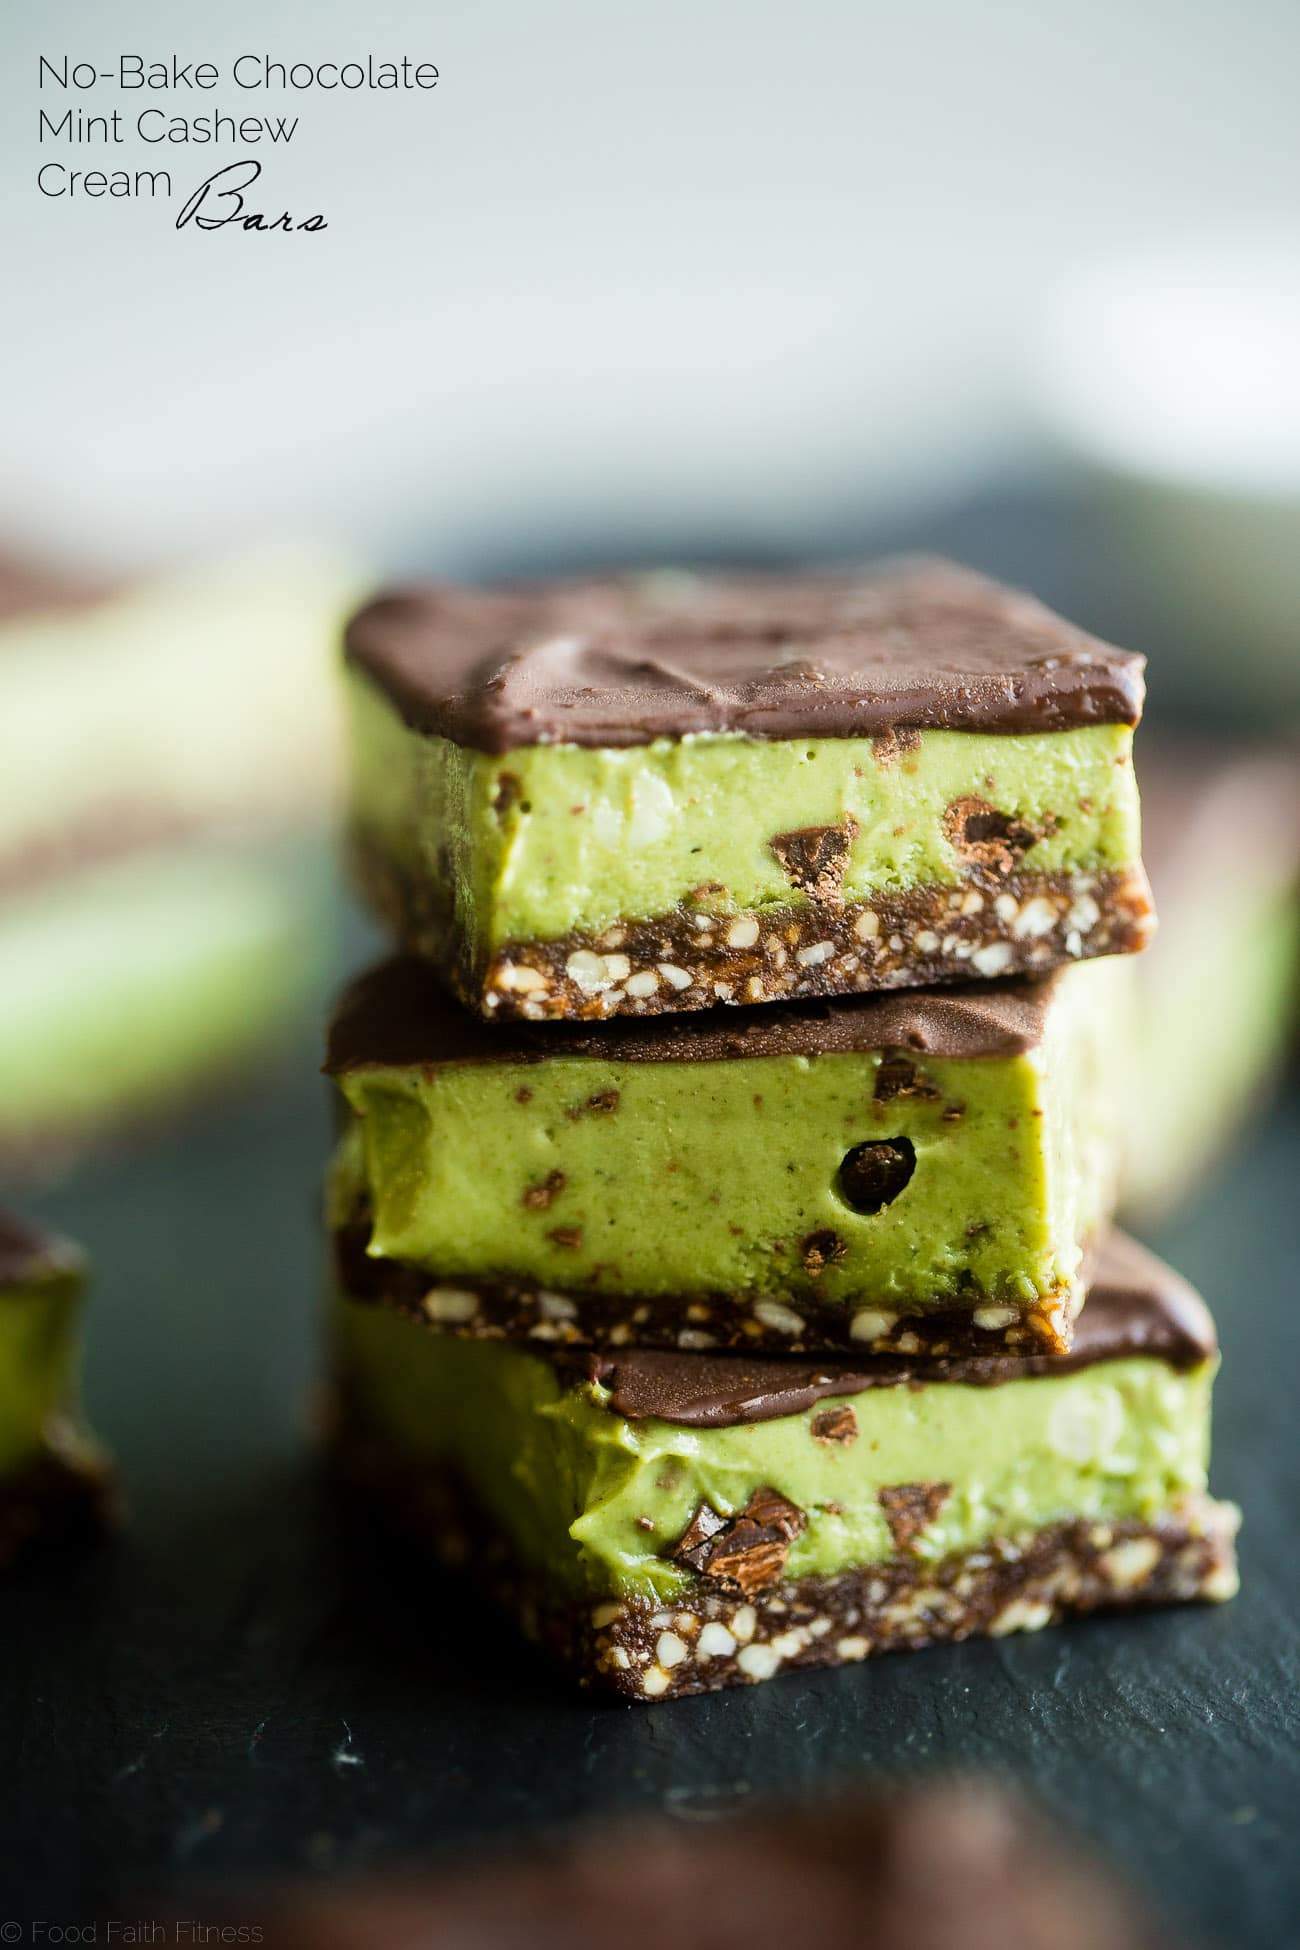 No Bake Mint Chocolate Cashew Cream Bars - These easy mint chocolate cashew cream bars are so creamy and only have 7 ingredients! They're a healthy, vegan and paleo friendly dessert for the holidays! | Foodfaithfitness.com | @FoodFaithFit